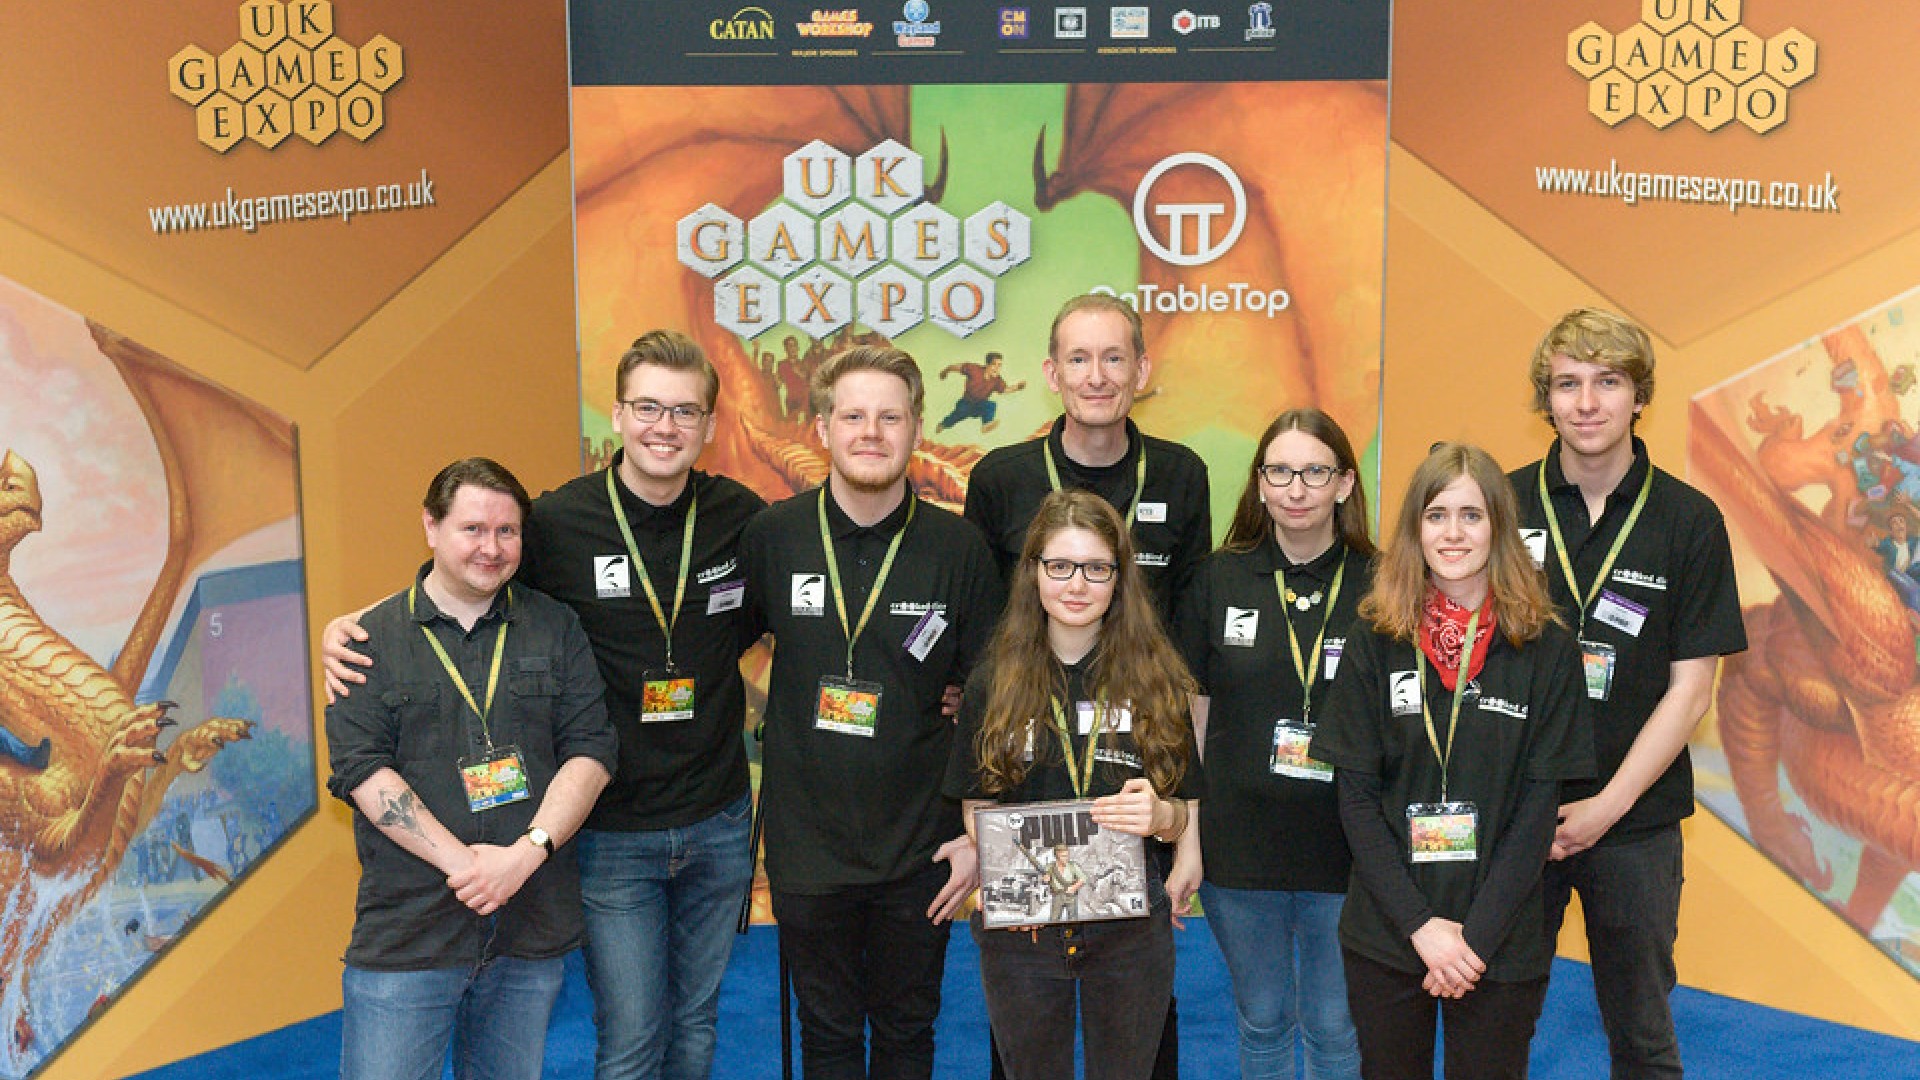 An image of a group of Edge Hill students and Dr Peter Wright stood in front of a sign that says "Uk Games Expo".